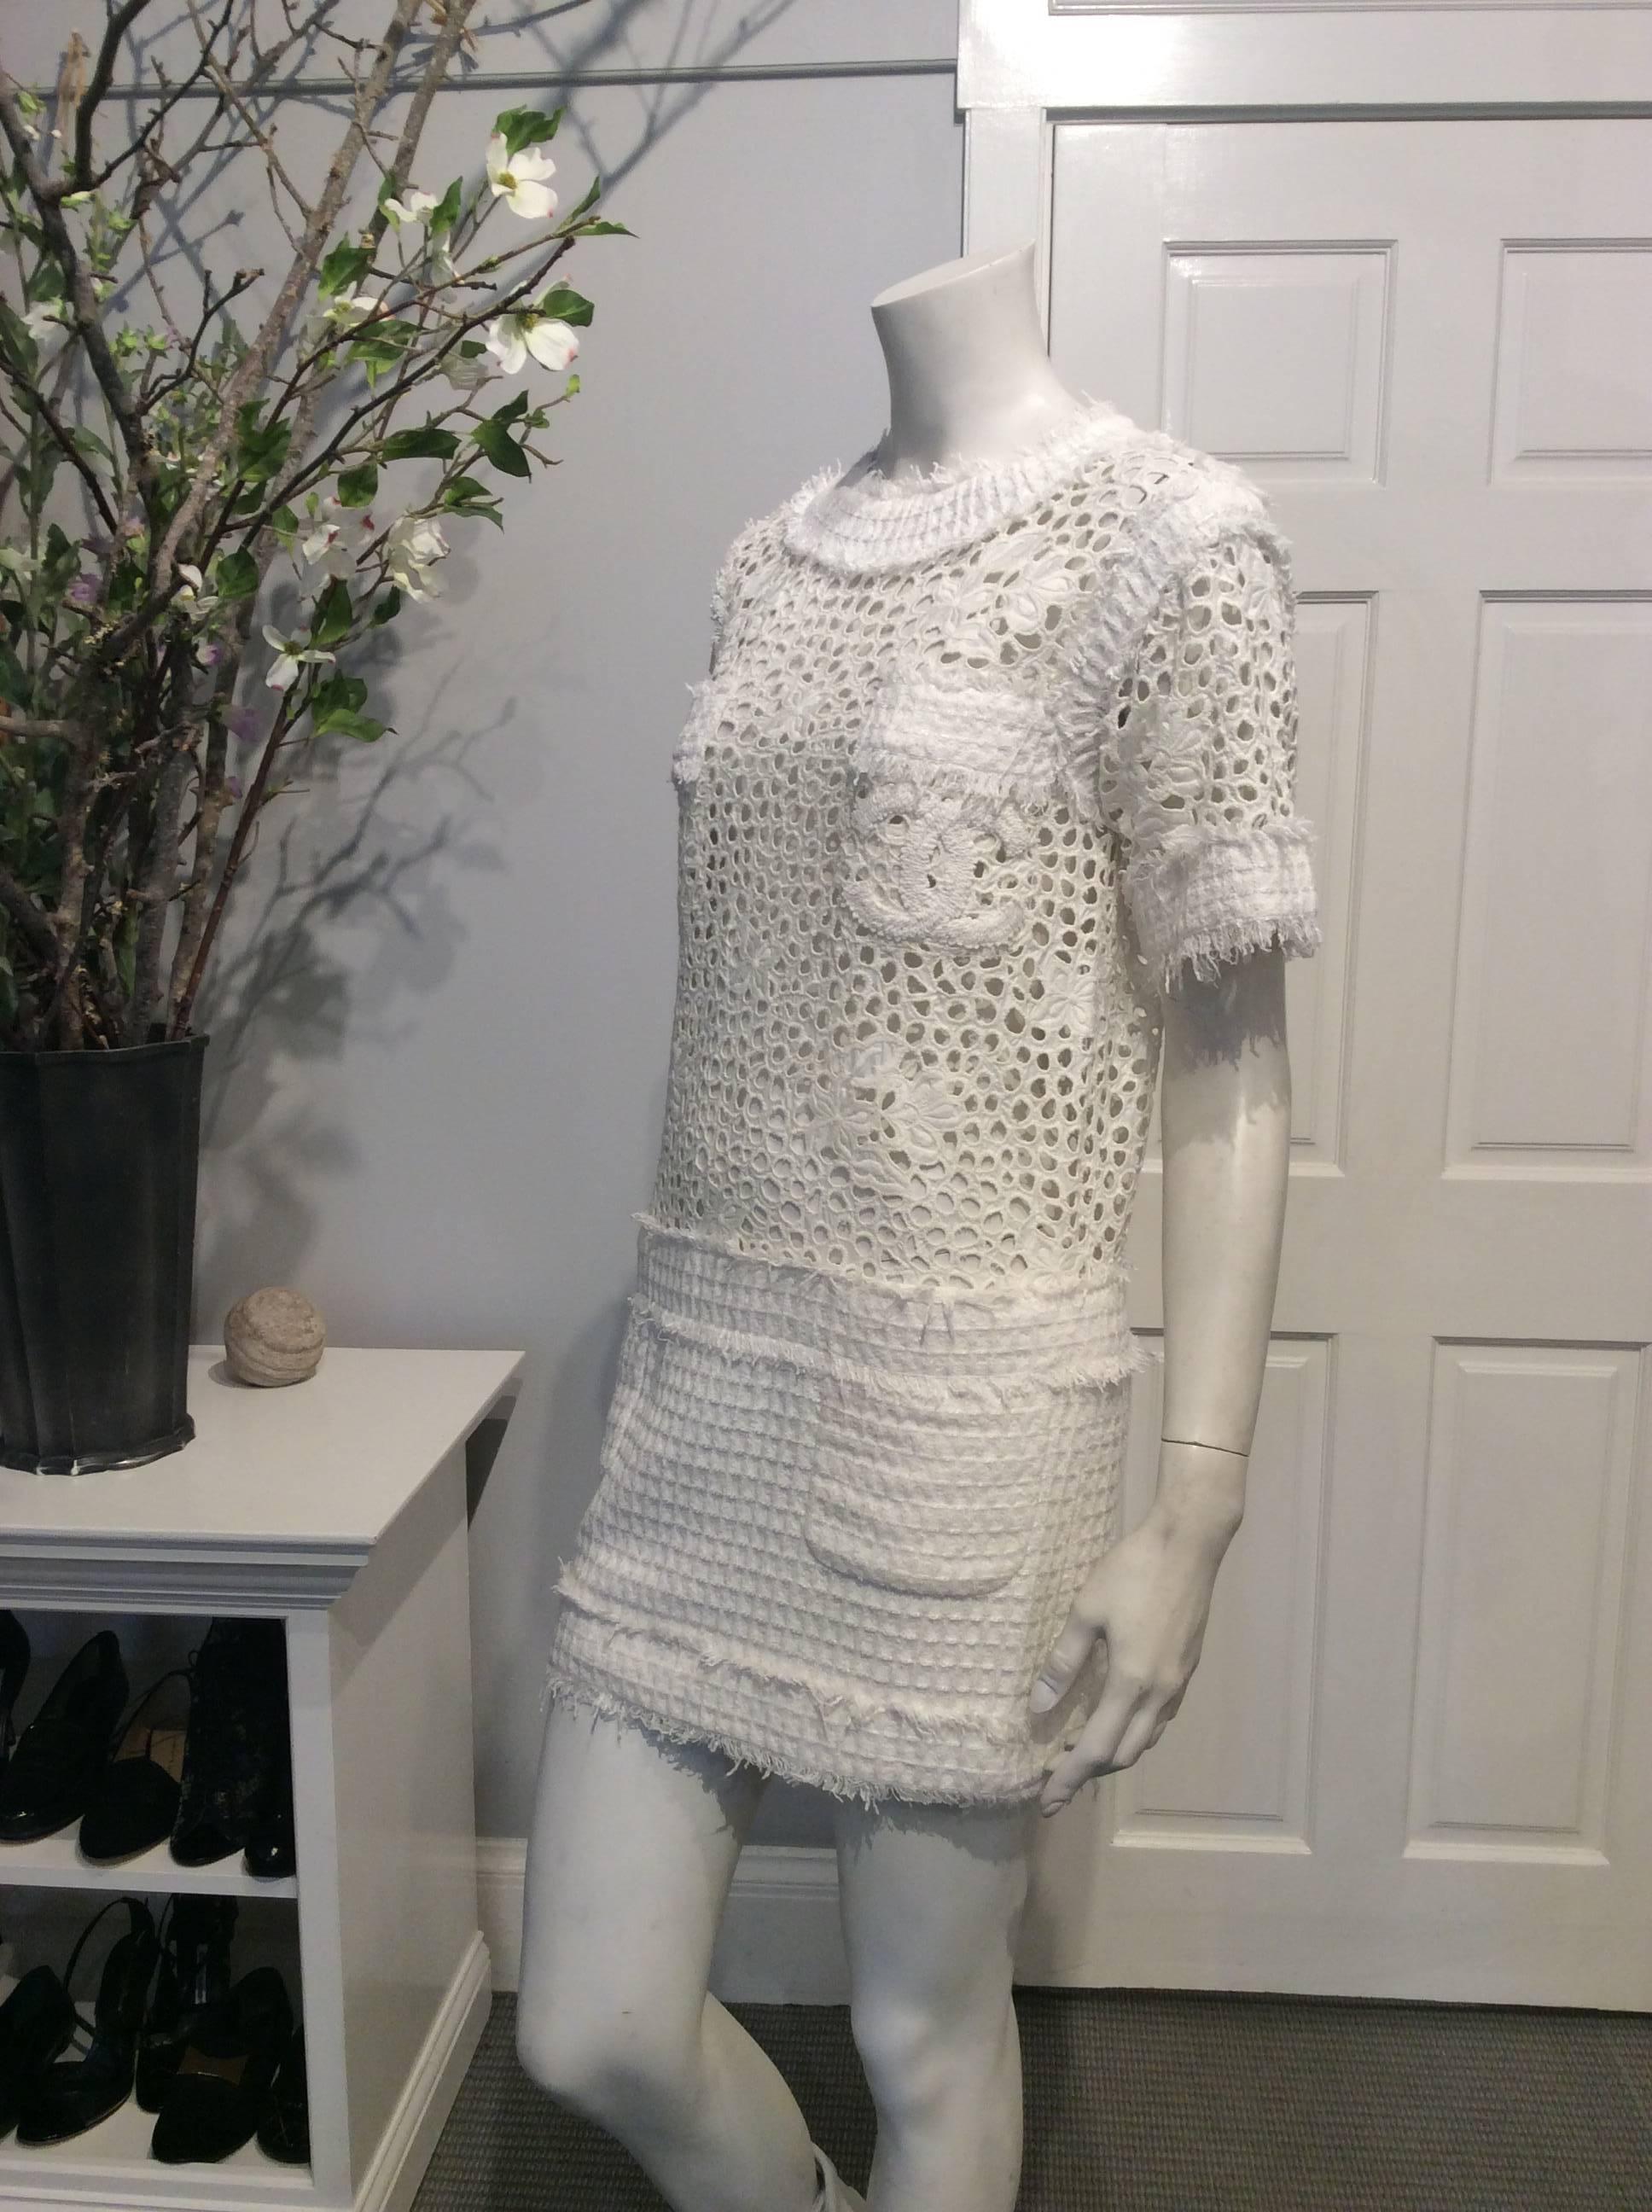 Off white Chanel dress in Sz 34 (Us 2). The top and short sleeves are made of heavy unlined lace. Two small lace front pockets cover the breast area and one of the pockets is embroidered with two iconic CC. The short skirt is in a waffle fabric and